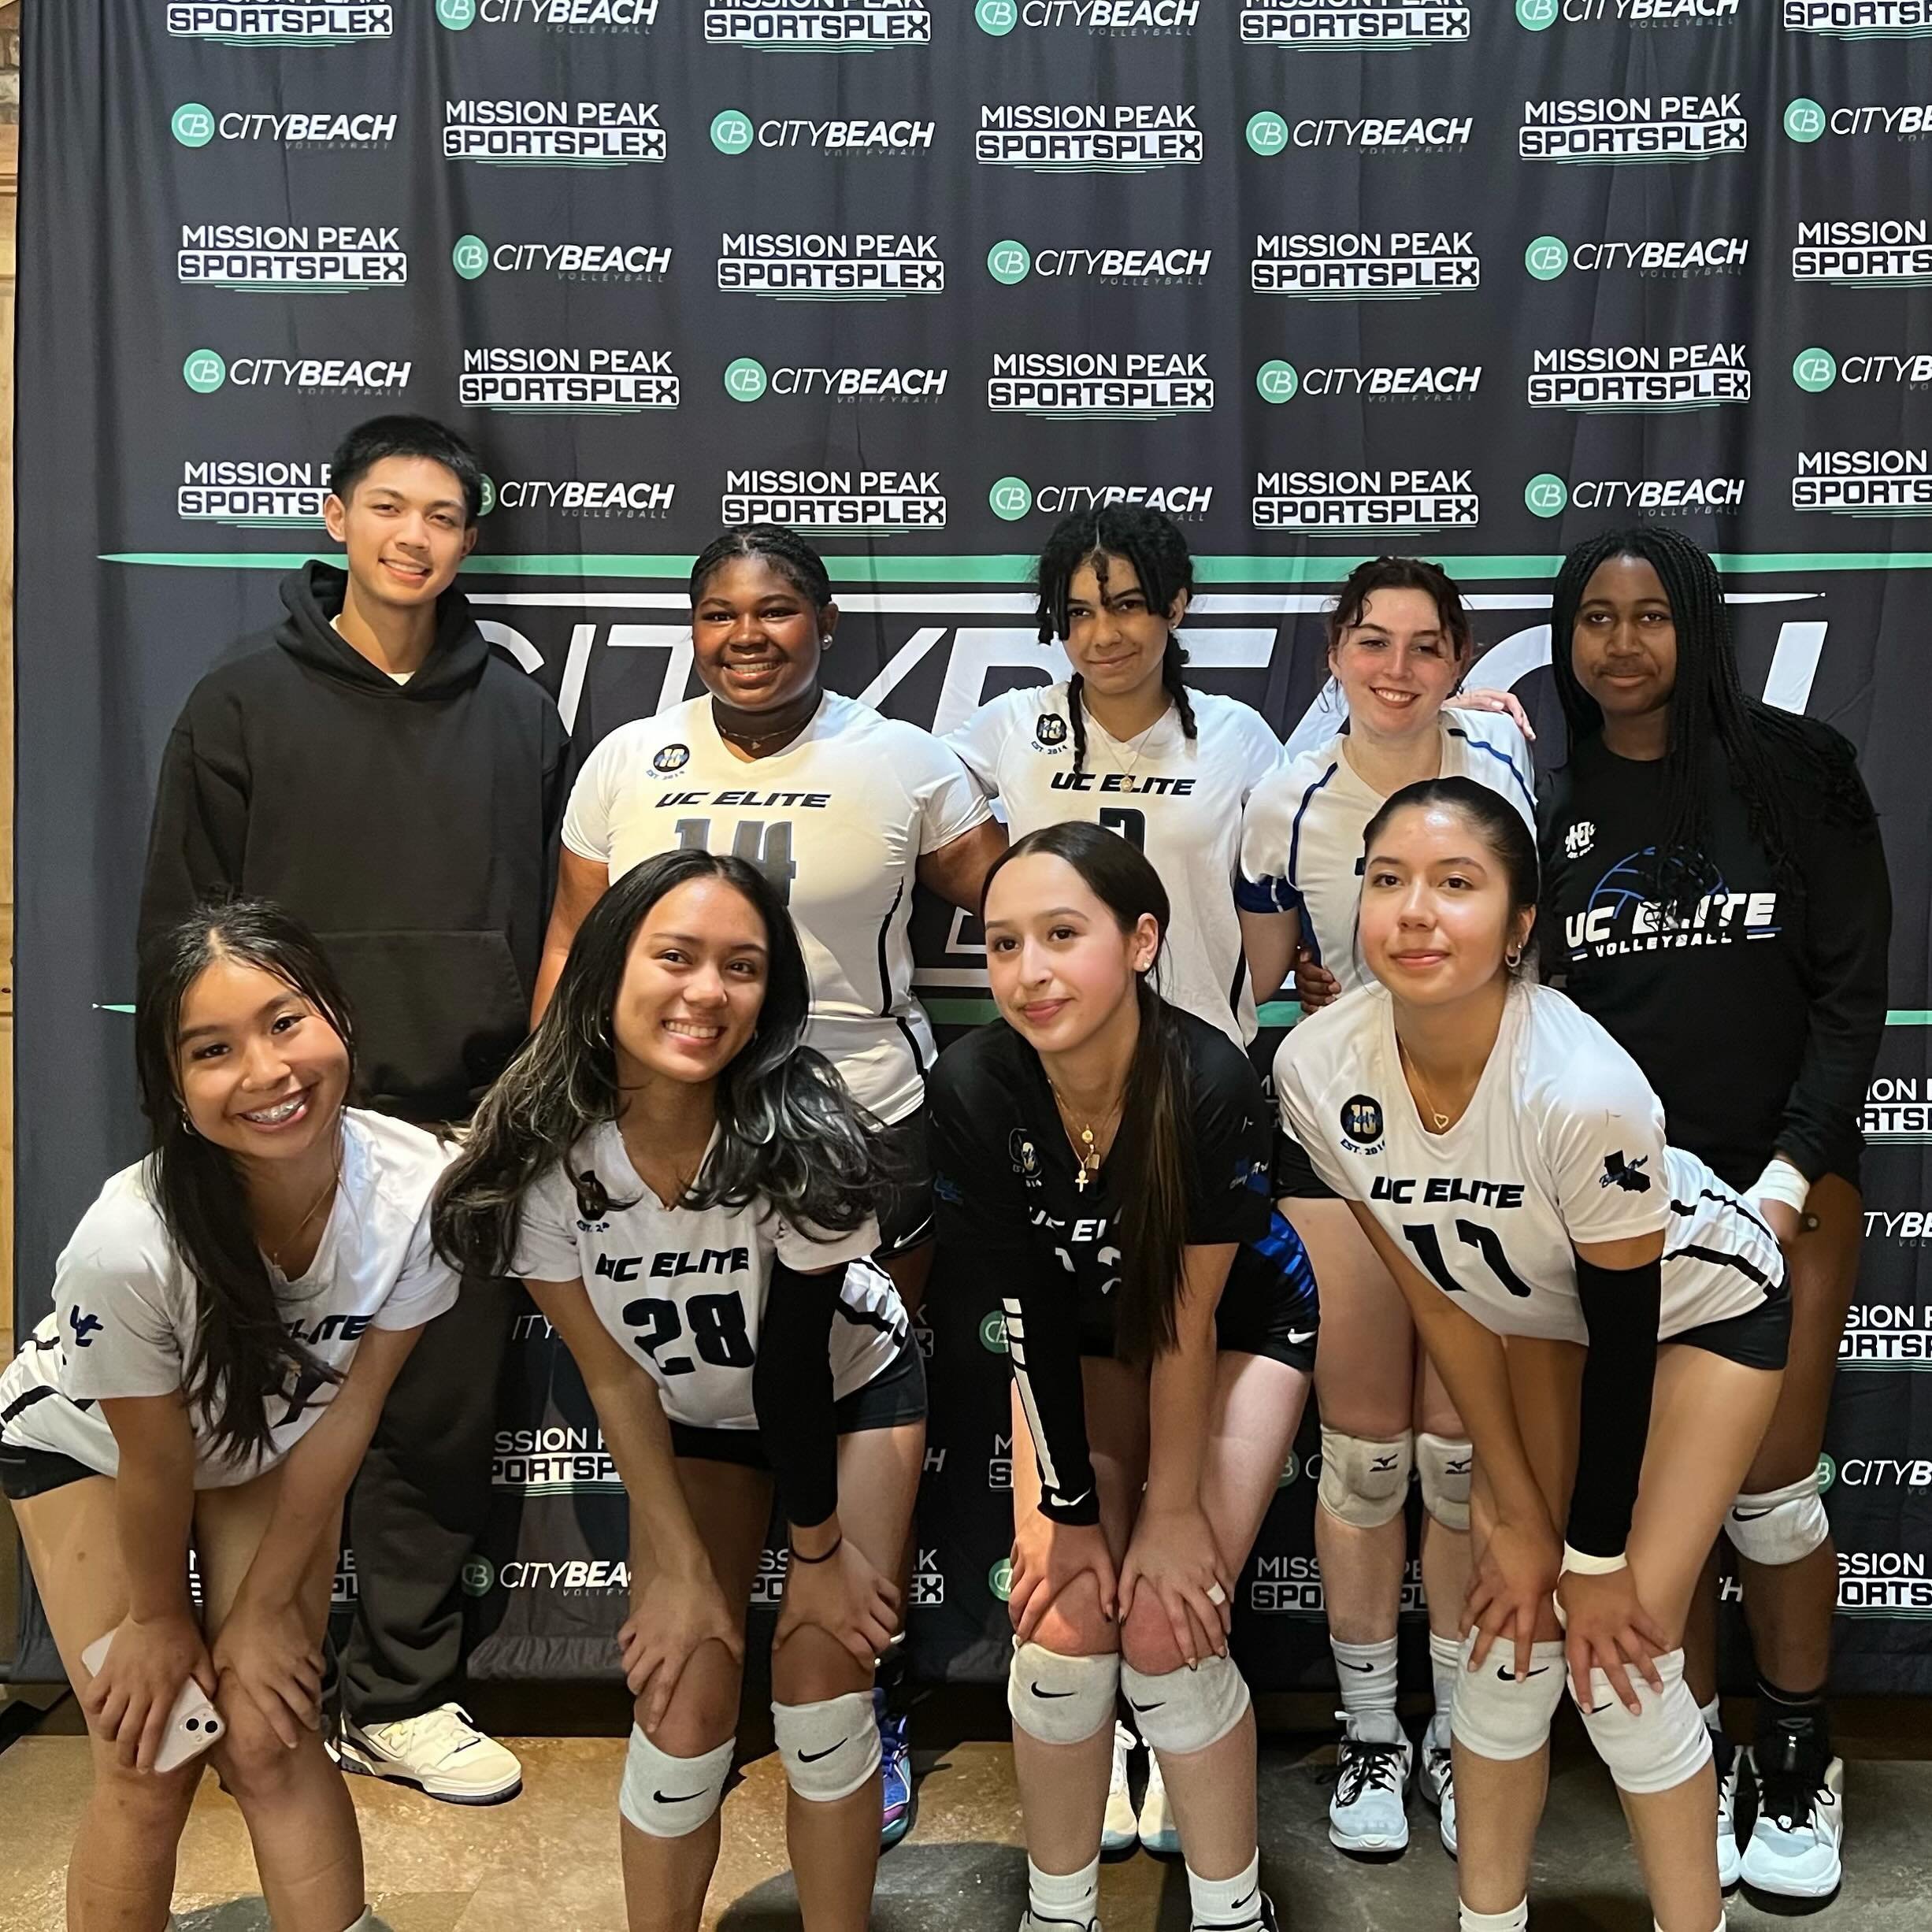 Round of applause to 17 Mafa for going 6-2 at the WCVBA Bay Area League! The team finishes TOP 5 overall! Way to represent UC ELITE! #ucelitevbc #ucelite